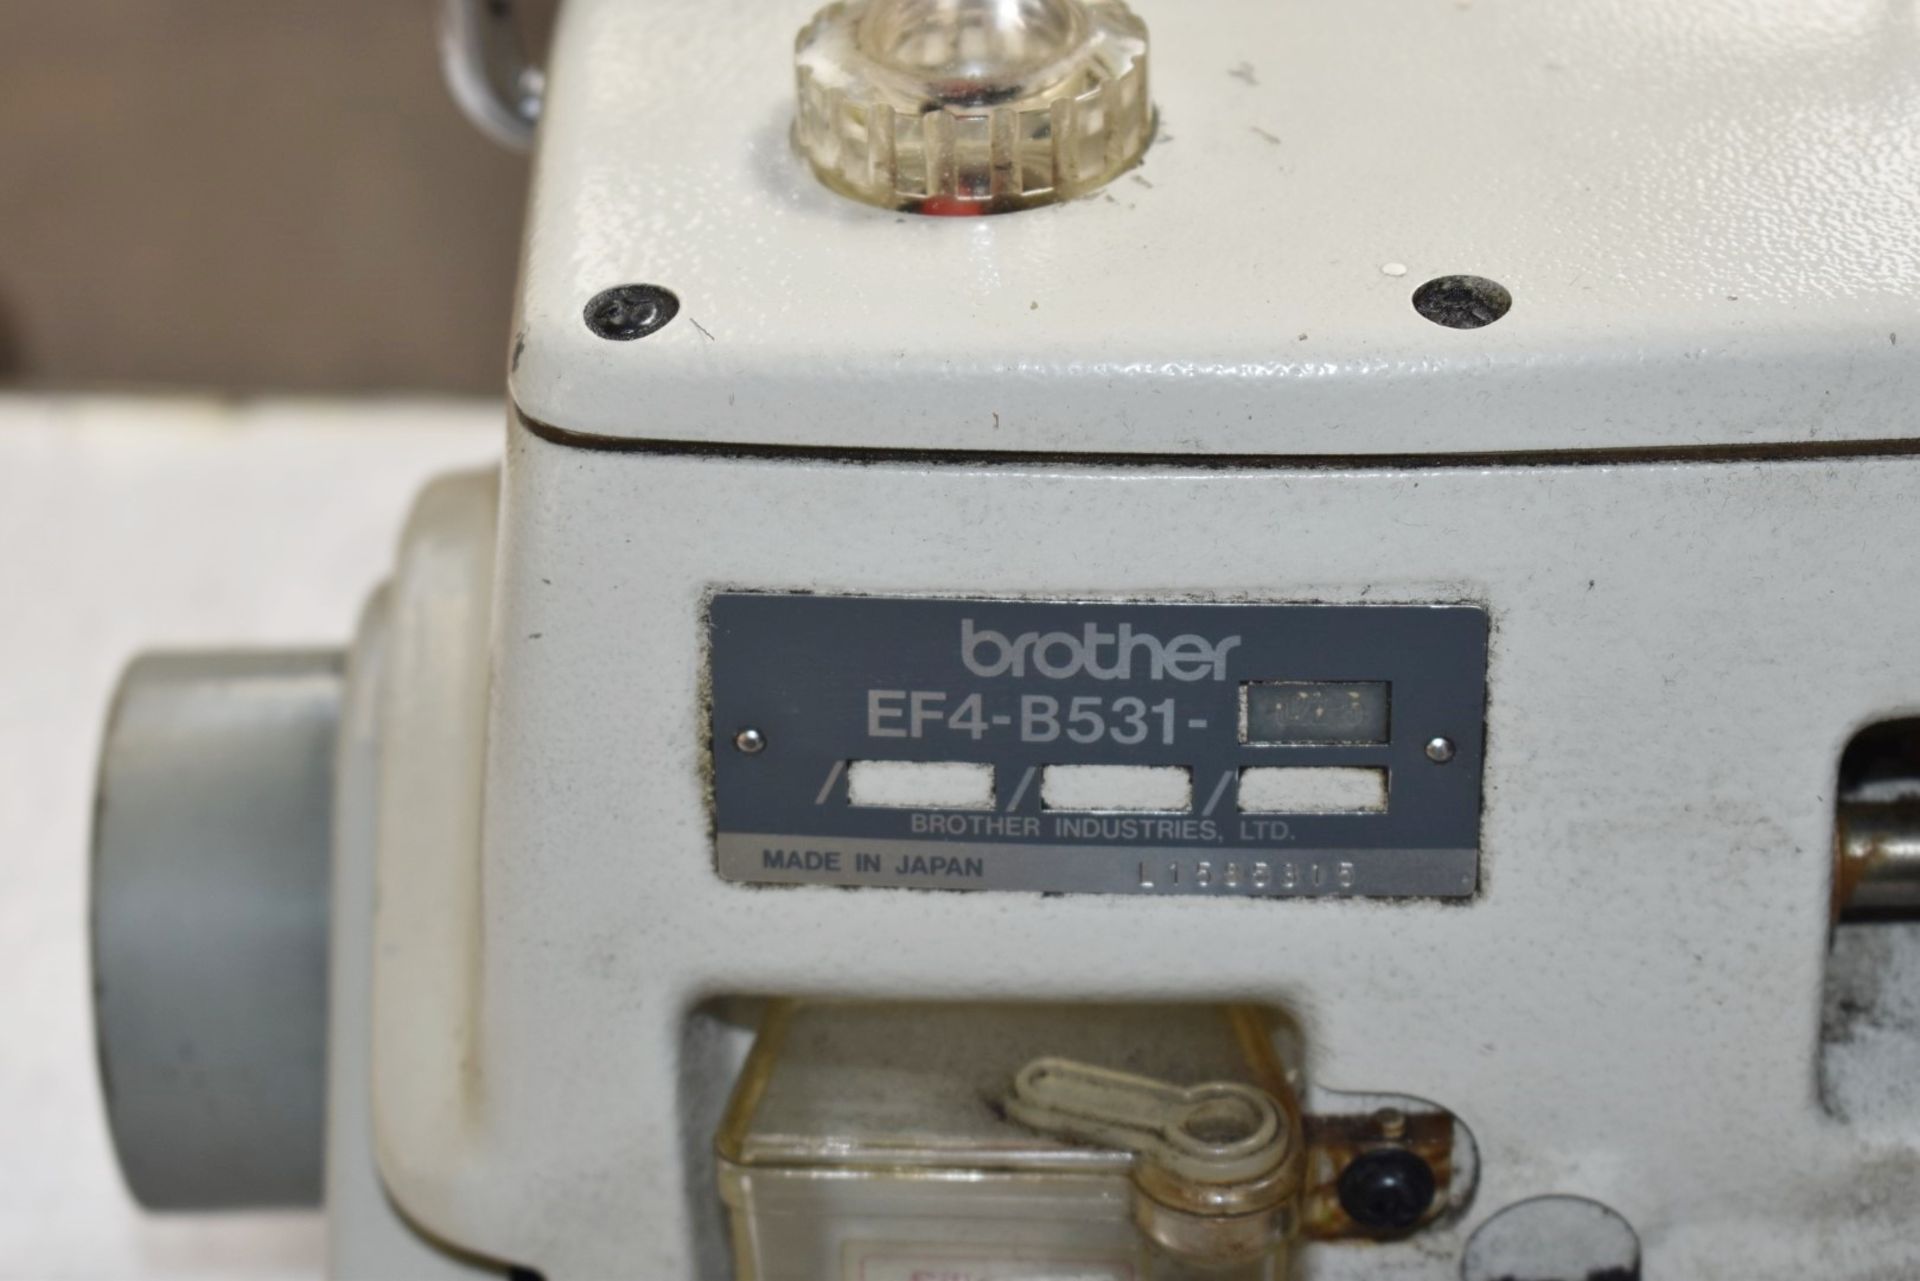 1 x Brother Overlock Industrial Sewing Machine - Model EF4-B531 - Image 19 of 27